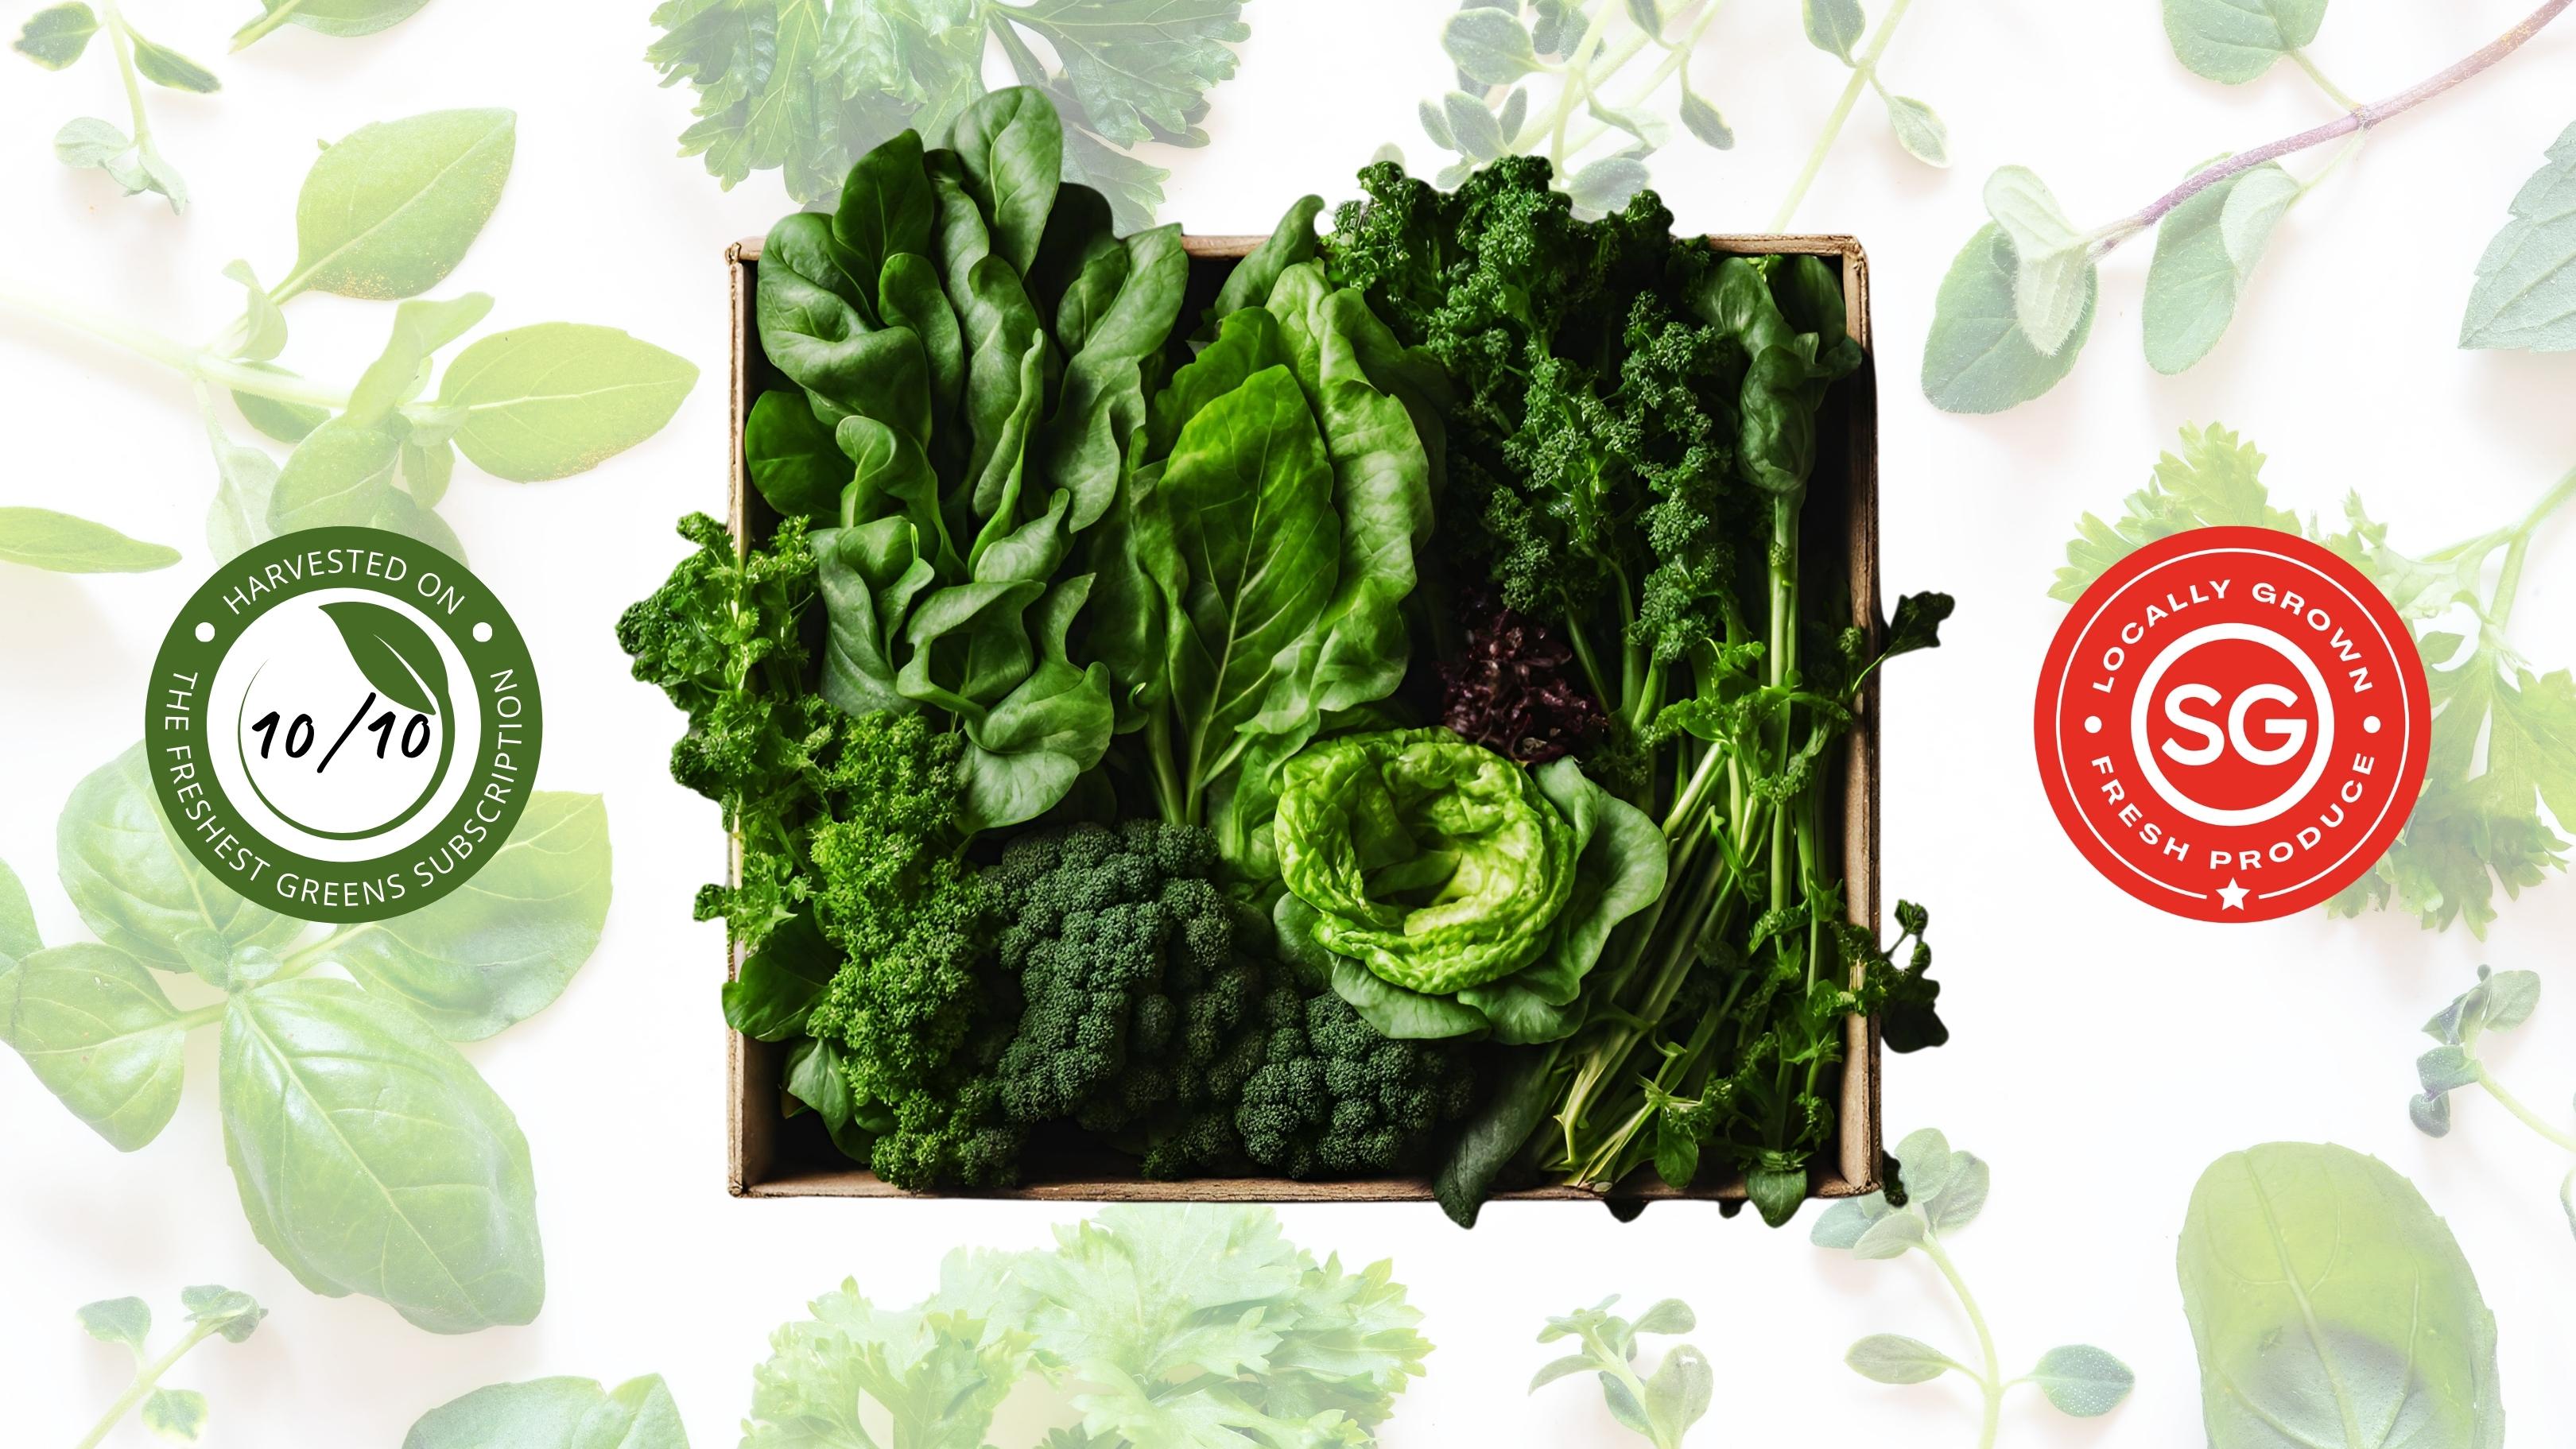 Subscribe to The Freshest Greens Box Monthly Subscription